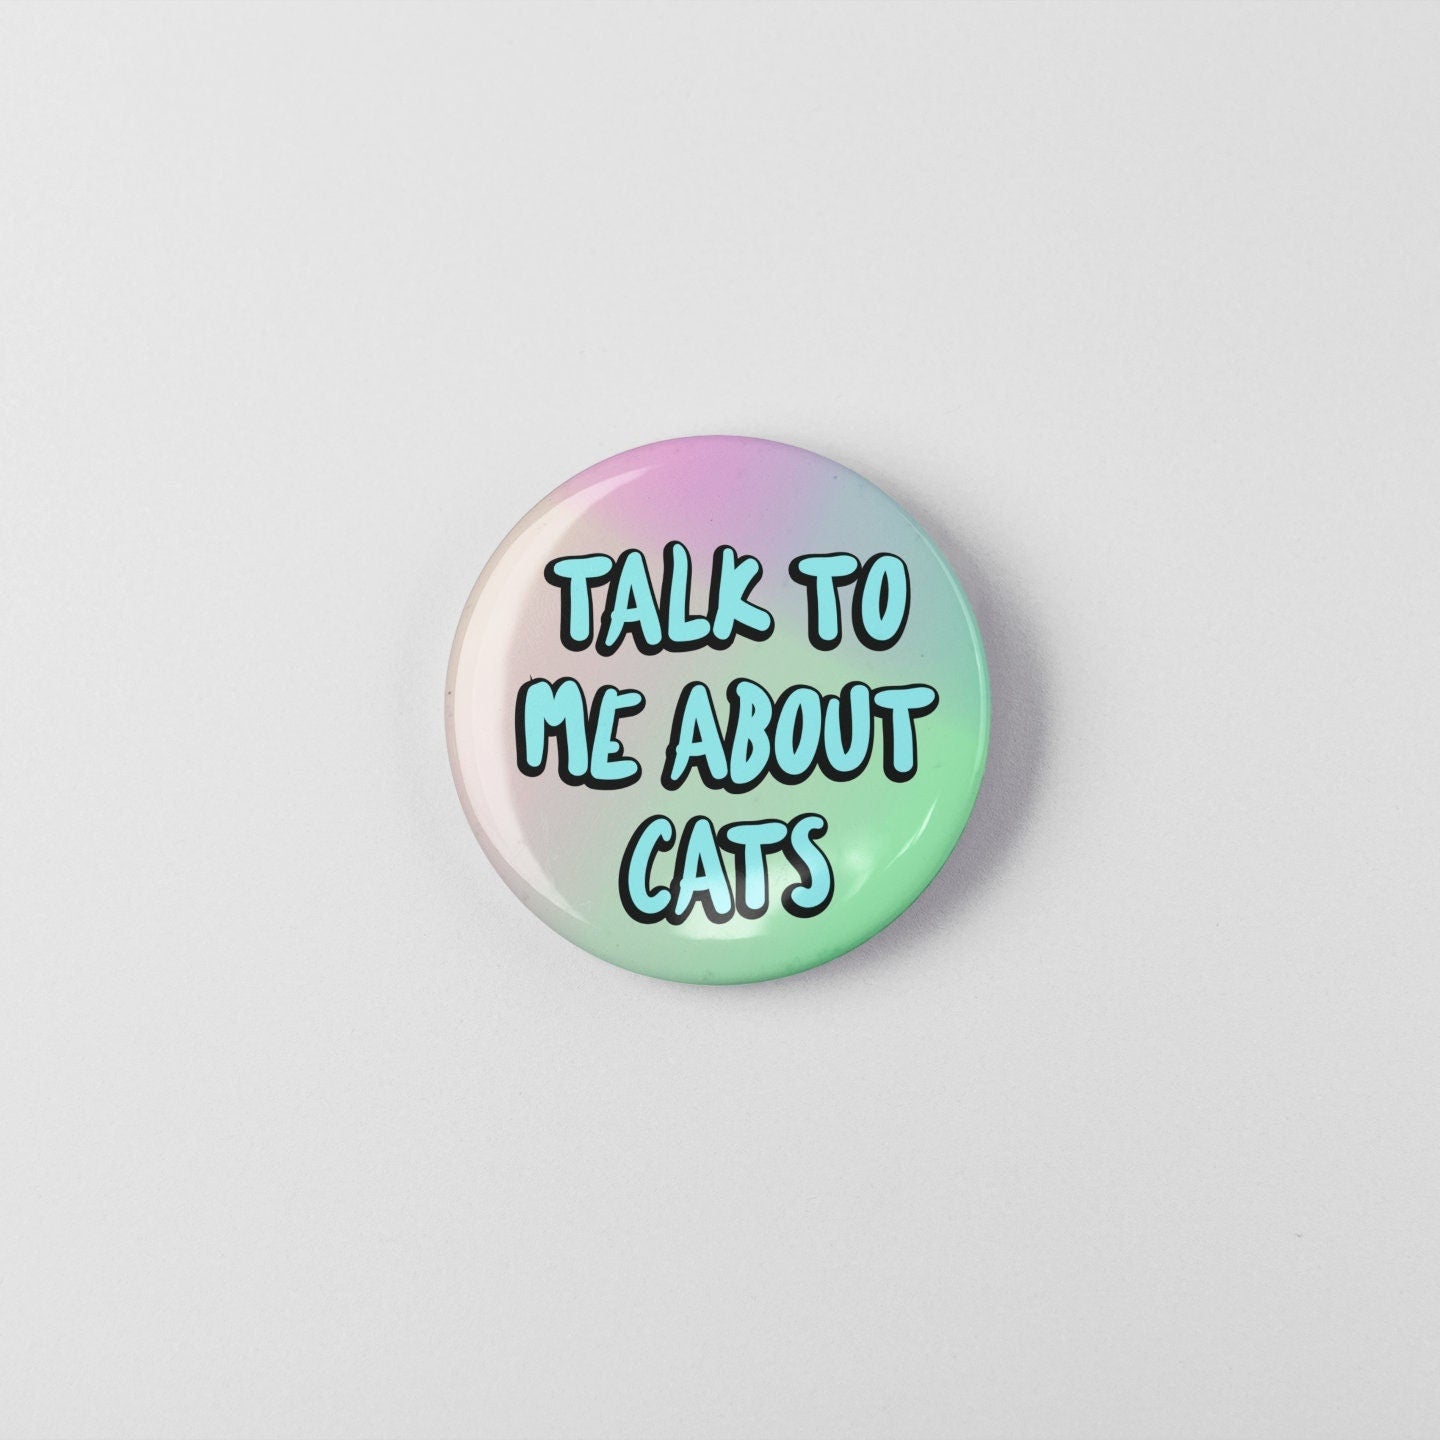 Talk To Me About Cats - Badge Pin | Cat Obsessed, Special Interest, Friend Gifts